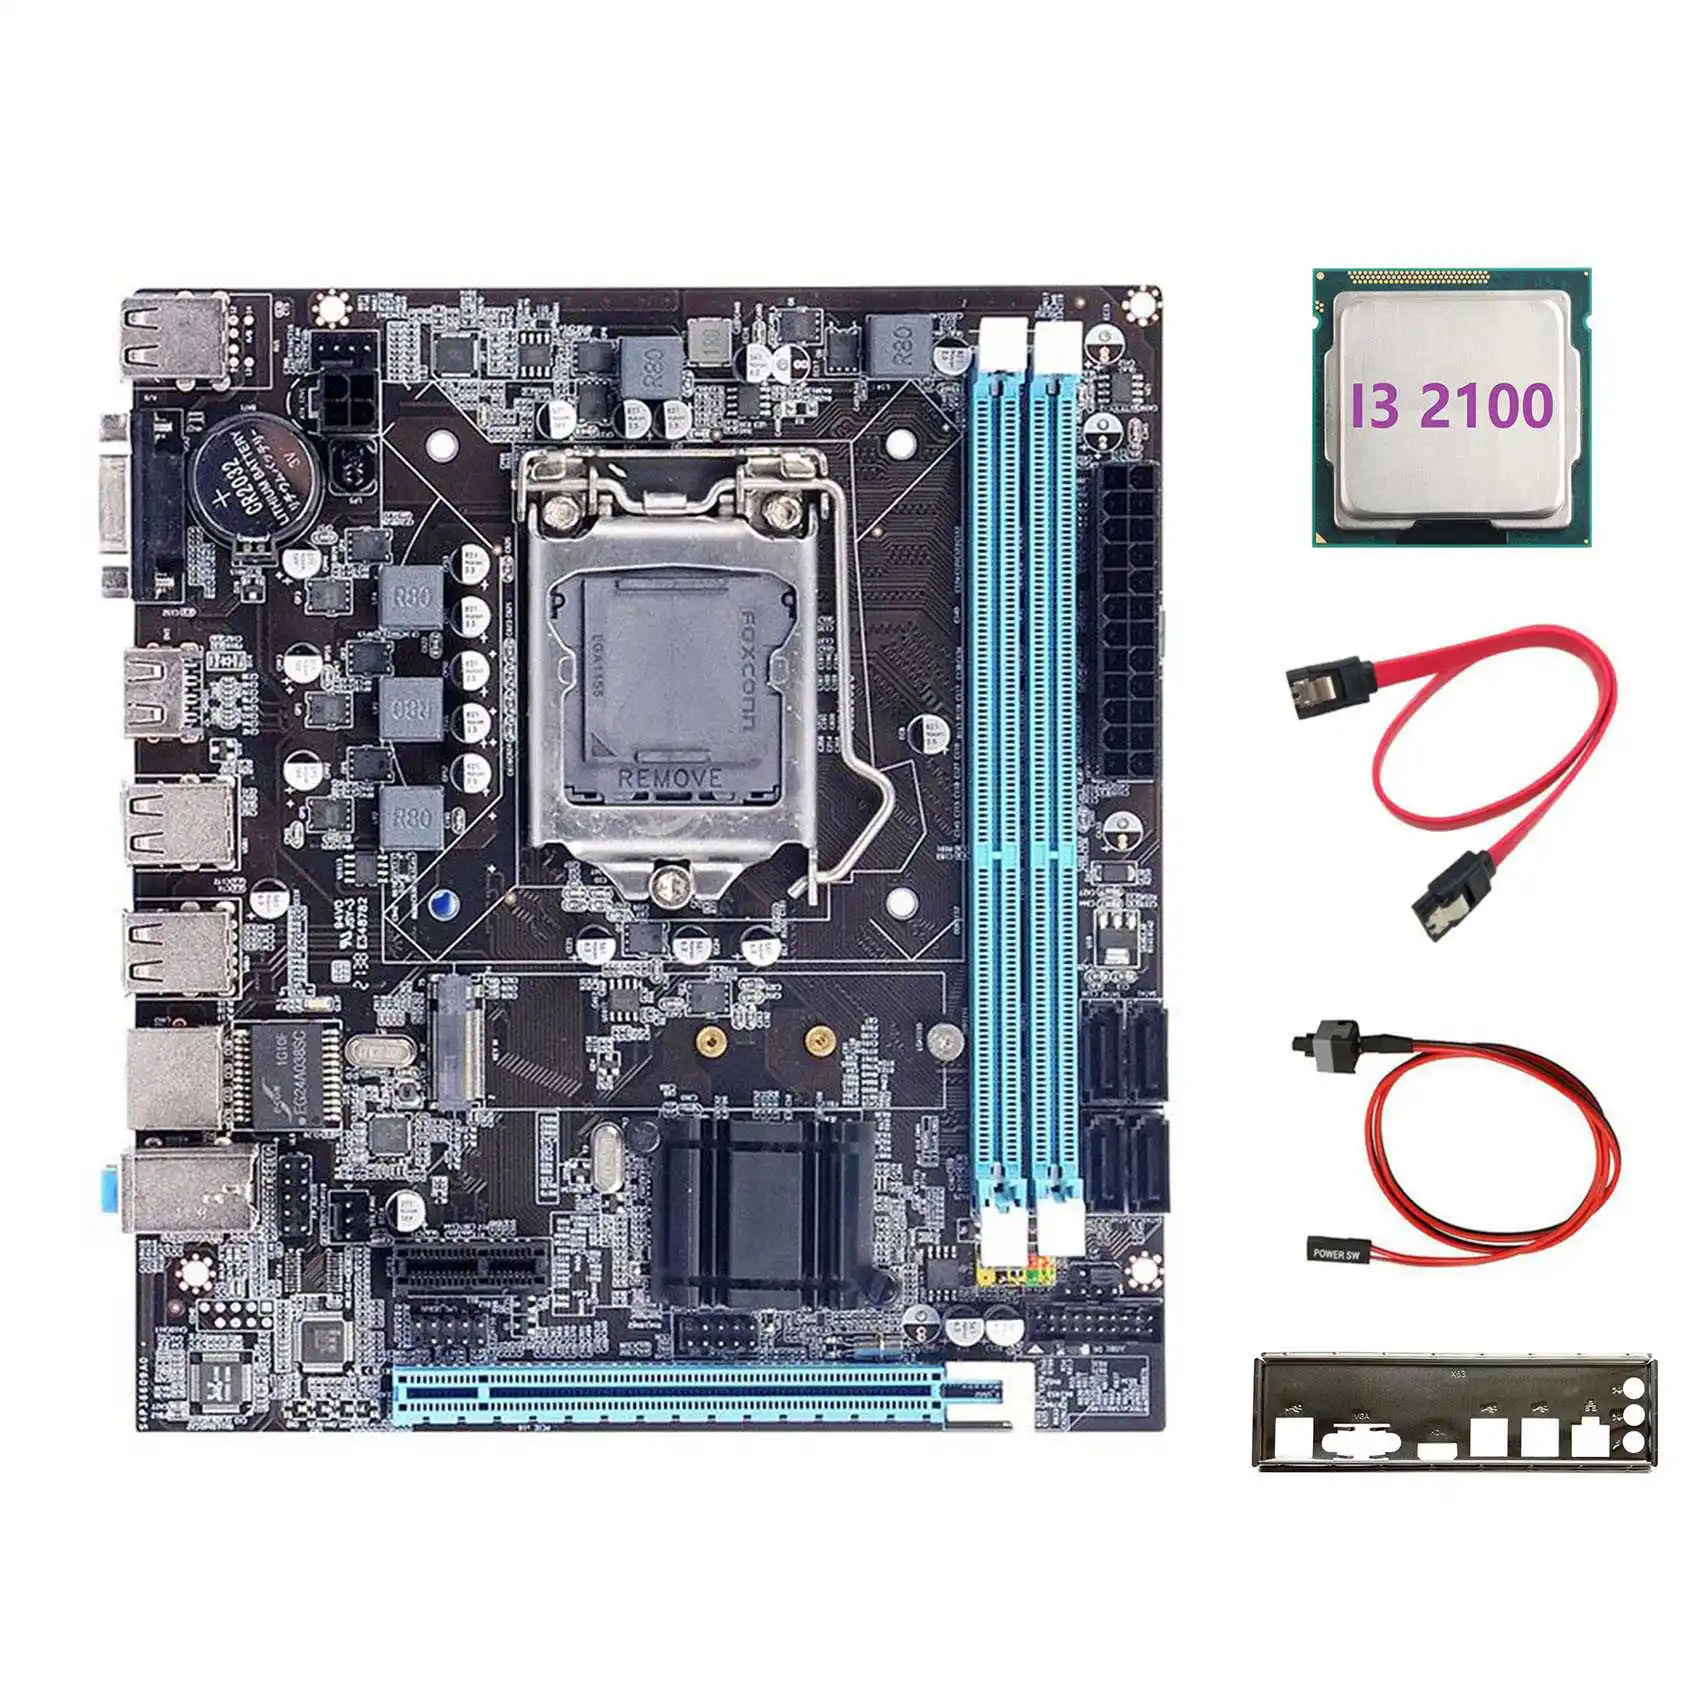 

H61 Motherboard+I3 2100 CPU+SATA Cable+Switch Cable+Baffle LGA1155 M.2 NVME DDR3 for Office for PUBG CF LOL Motherboard